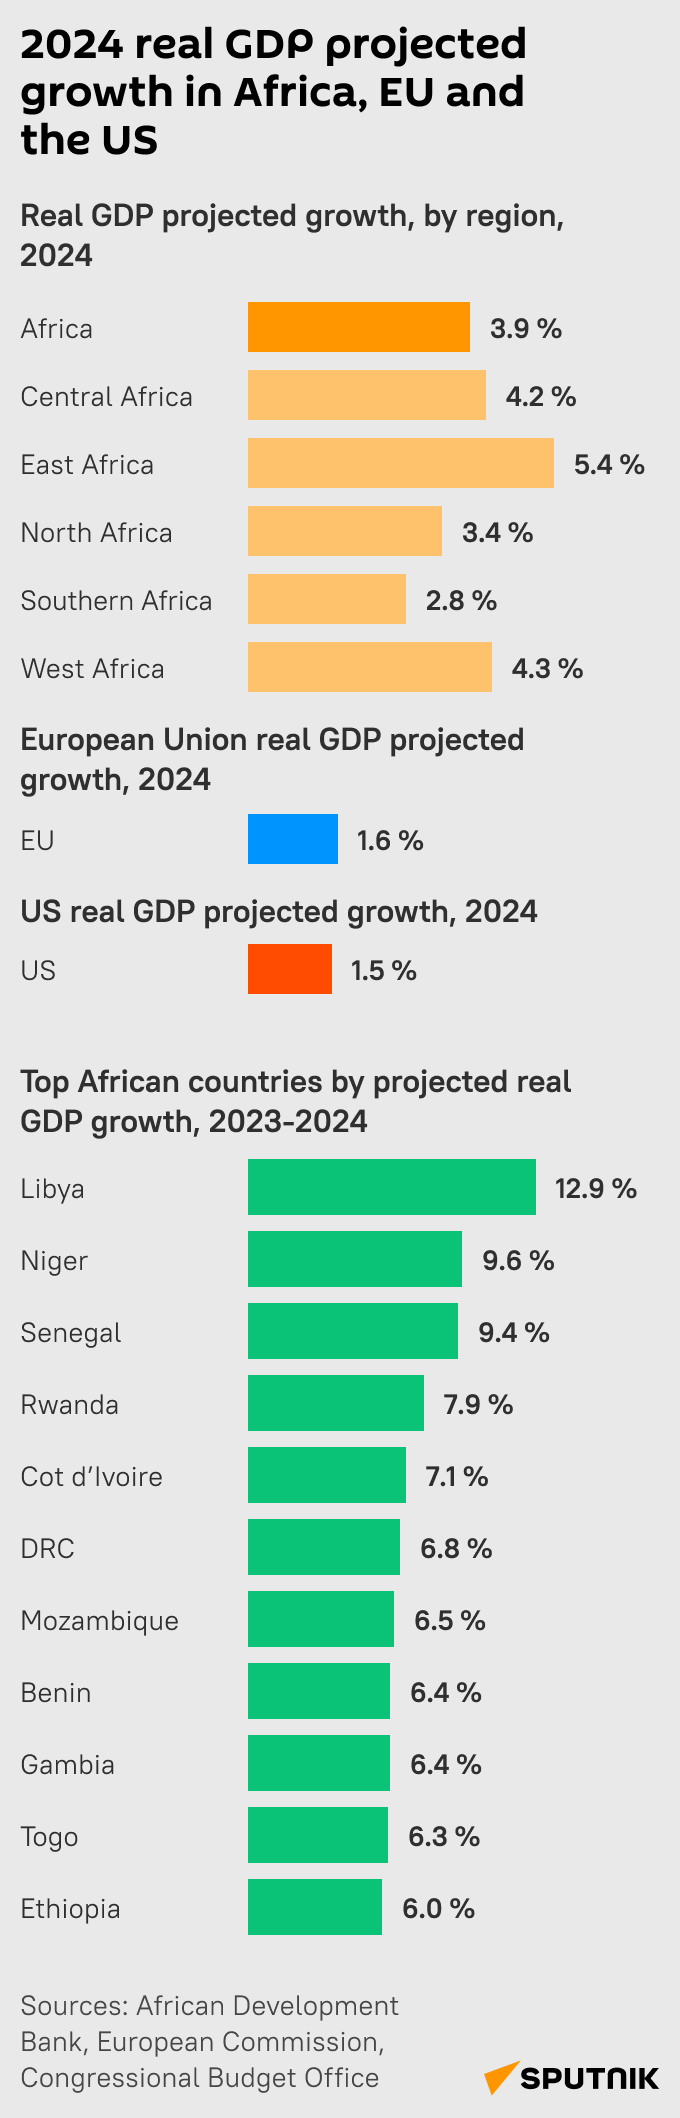 2024 real GDP growth in Africa, EU and the US - Sputnik International